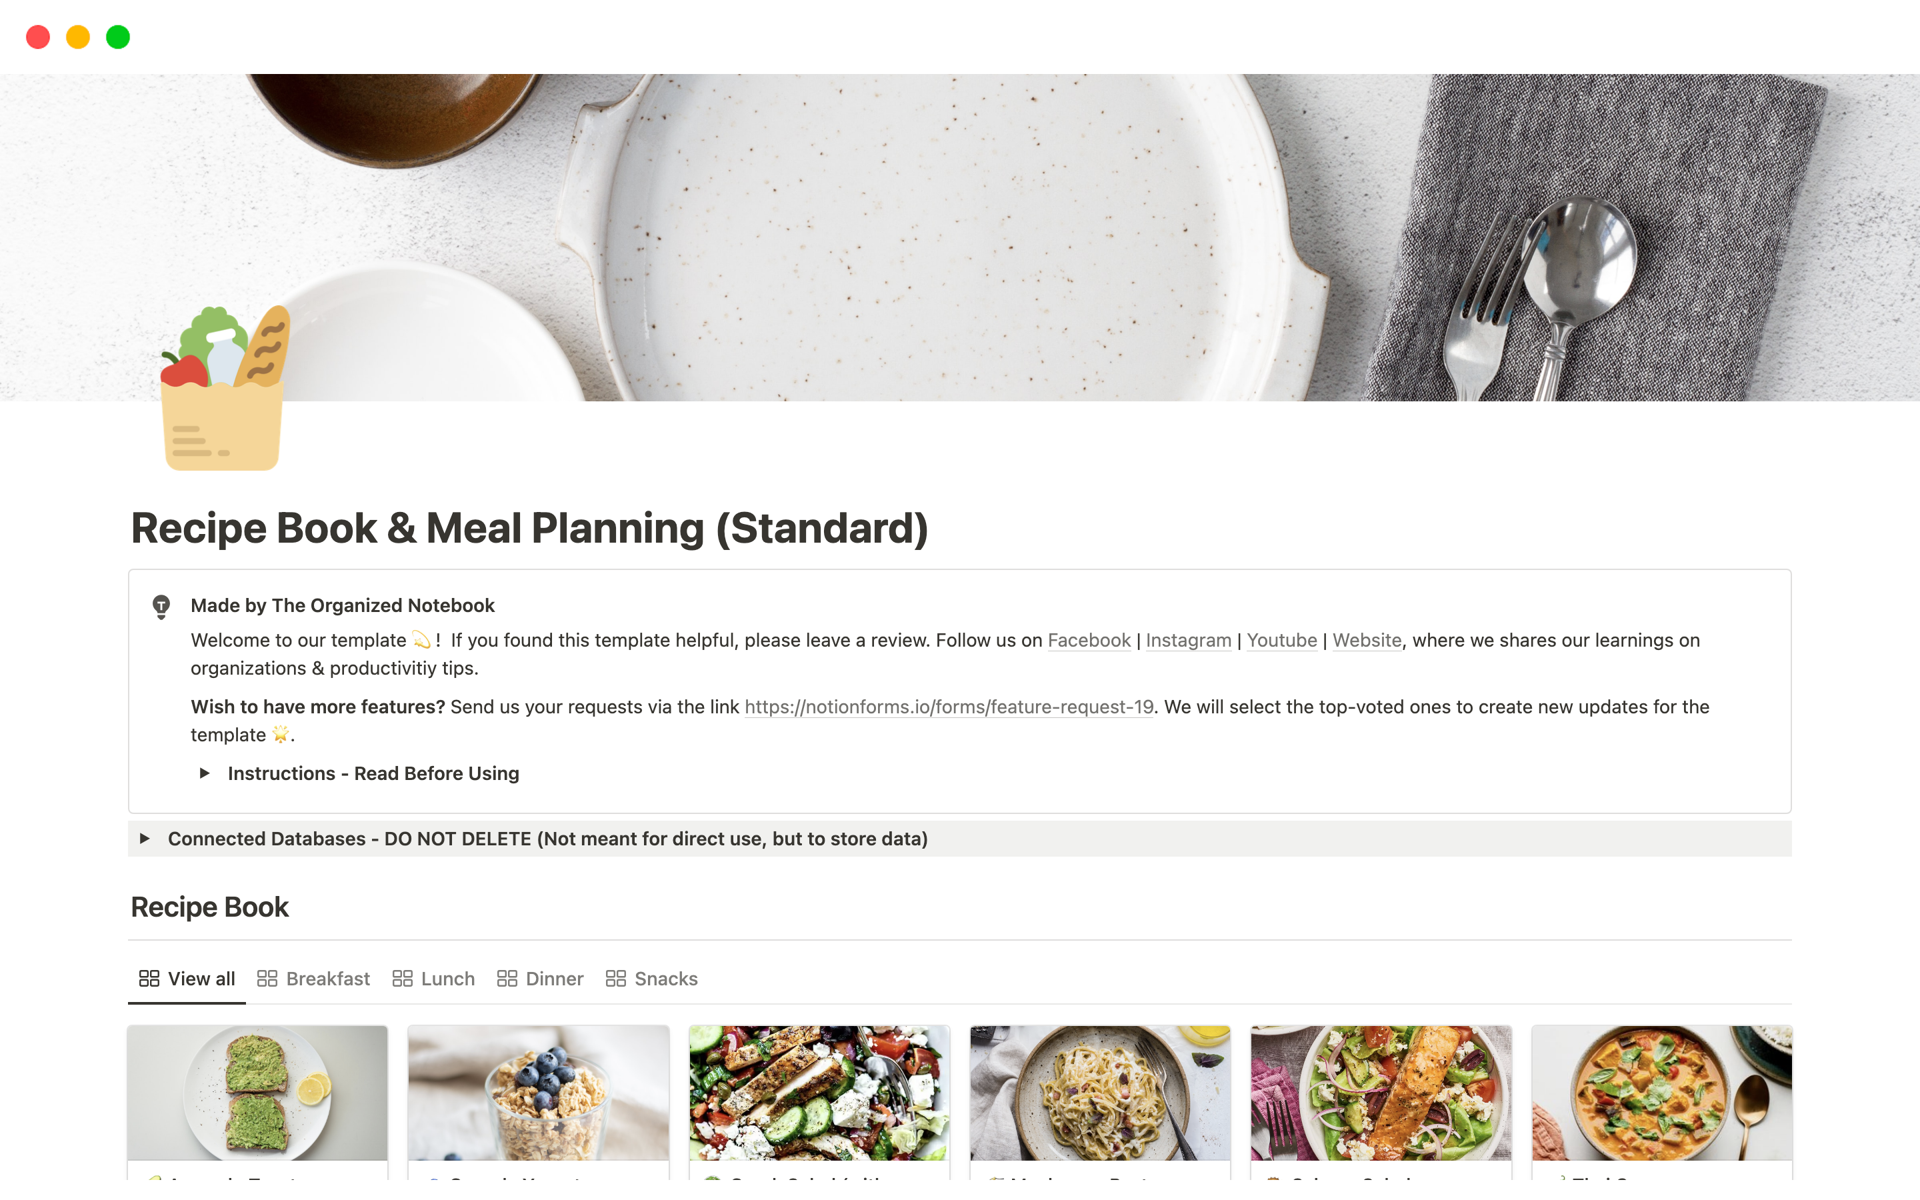 Meal planning tends to make it easier to eat healthily, save time, and cut down on eating out. This is why we would like to offer this recipe and meal planner as a freebie to our community.